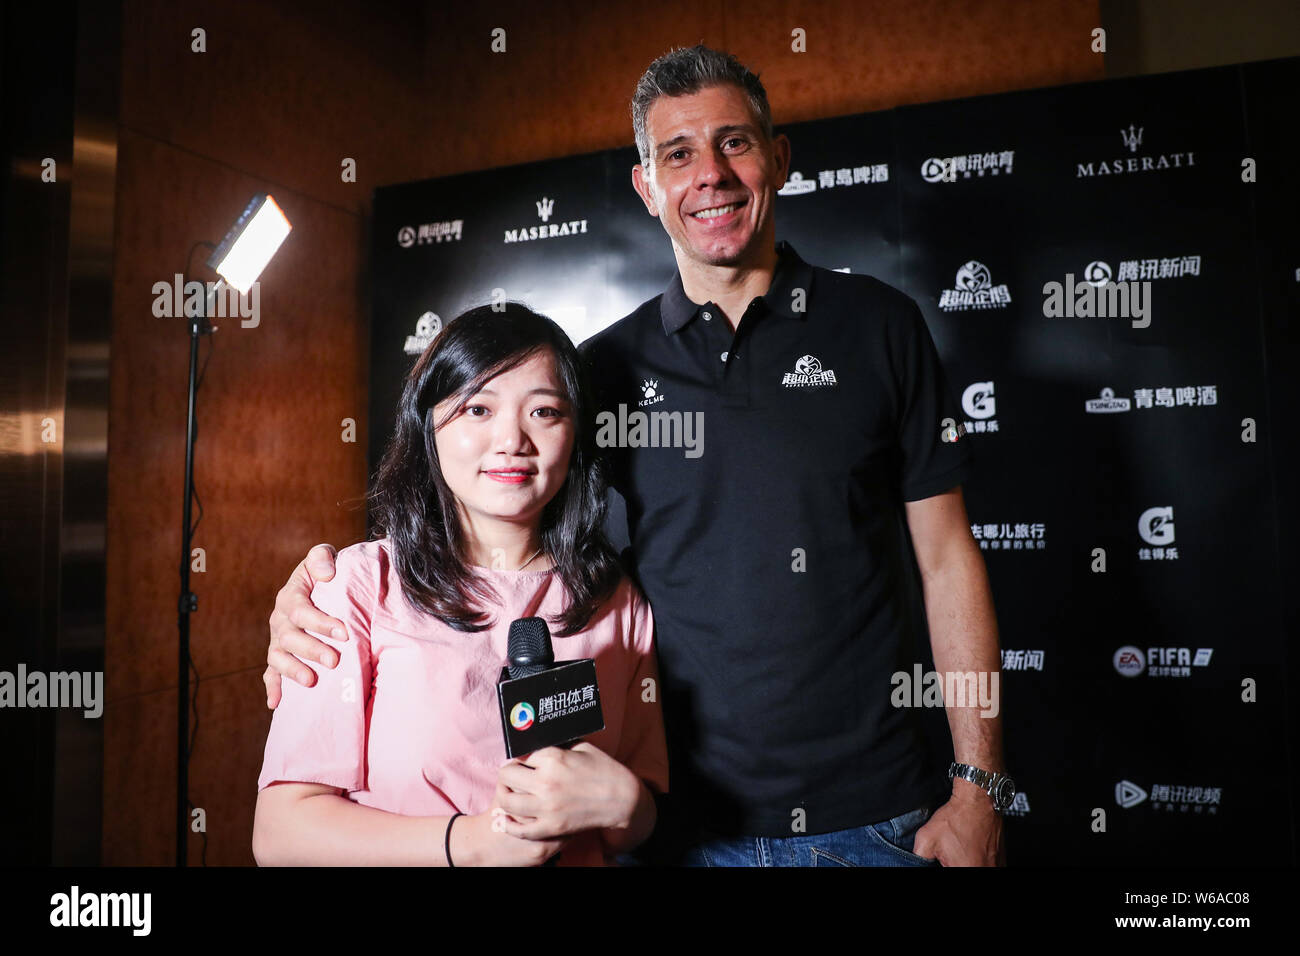 Italian former football player Francesco Toldo, right, poses for photos with a fan during an interview ahead of the 2018 Super Penguin Soccer Celebrit Stock Photo